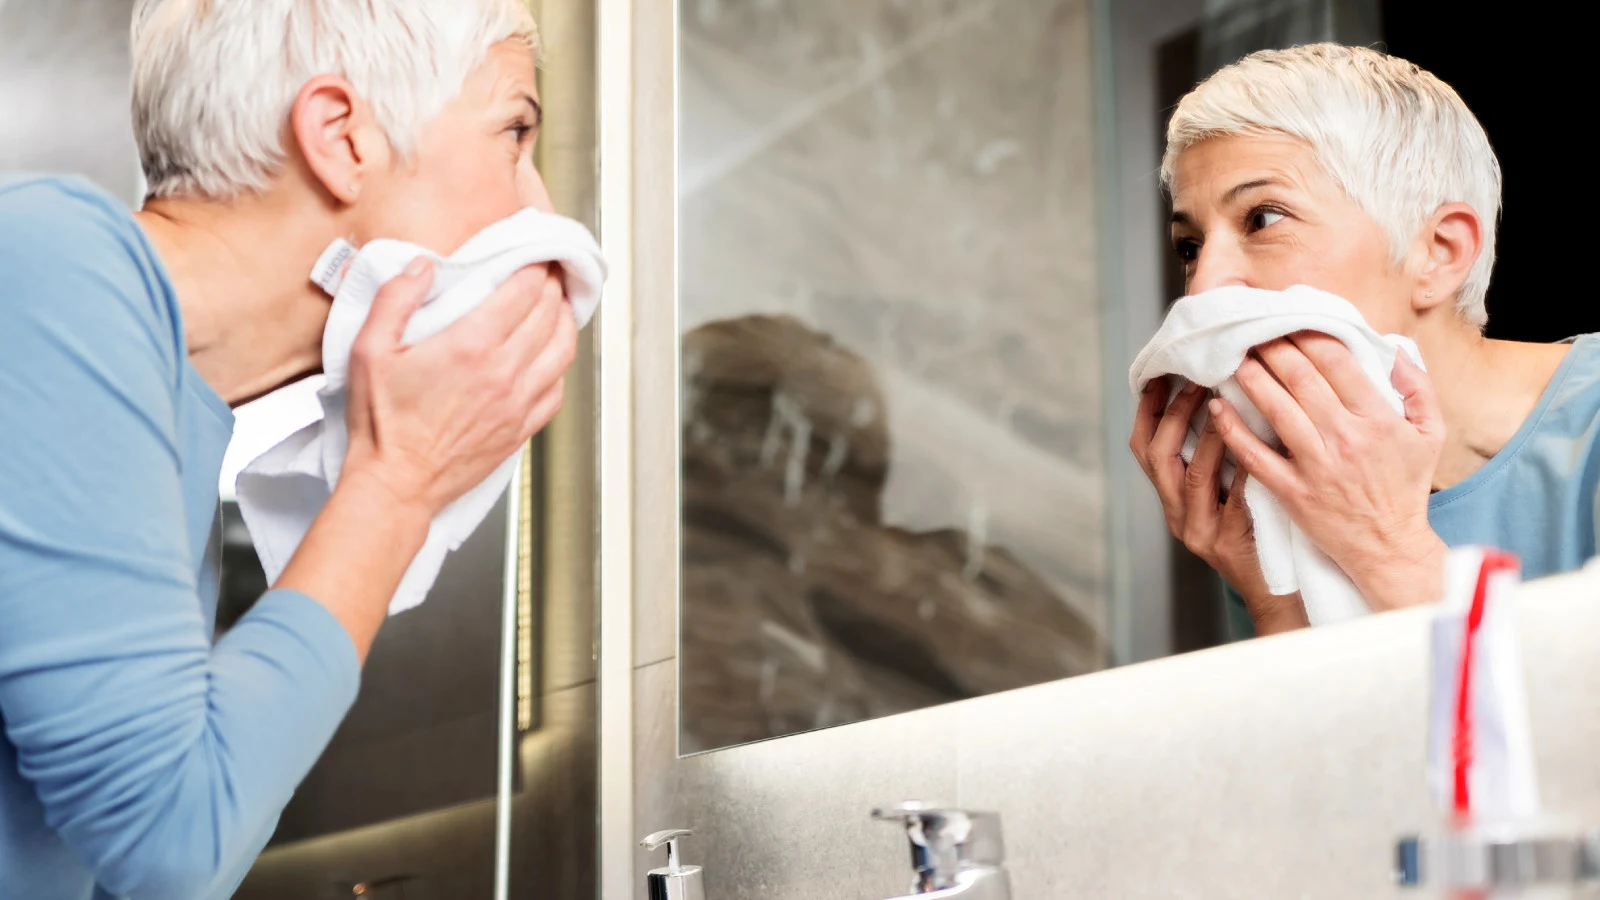 Woman wiping her face with a towel